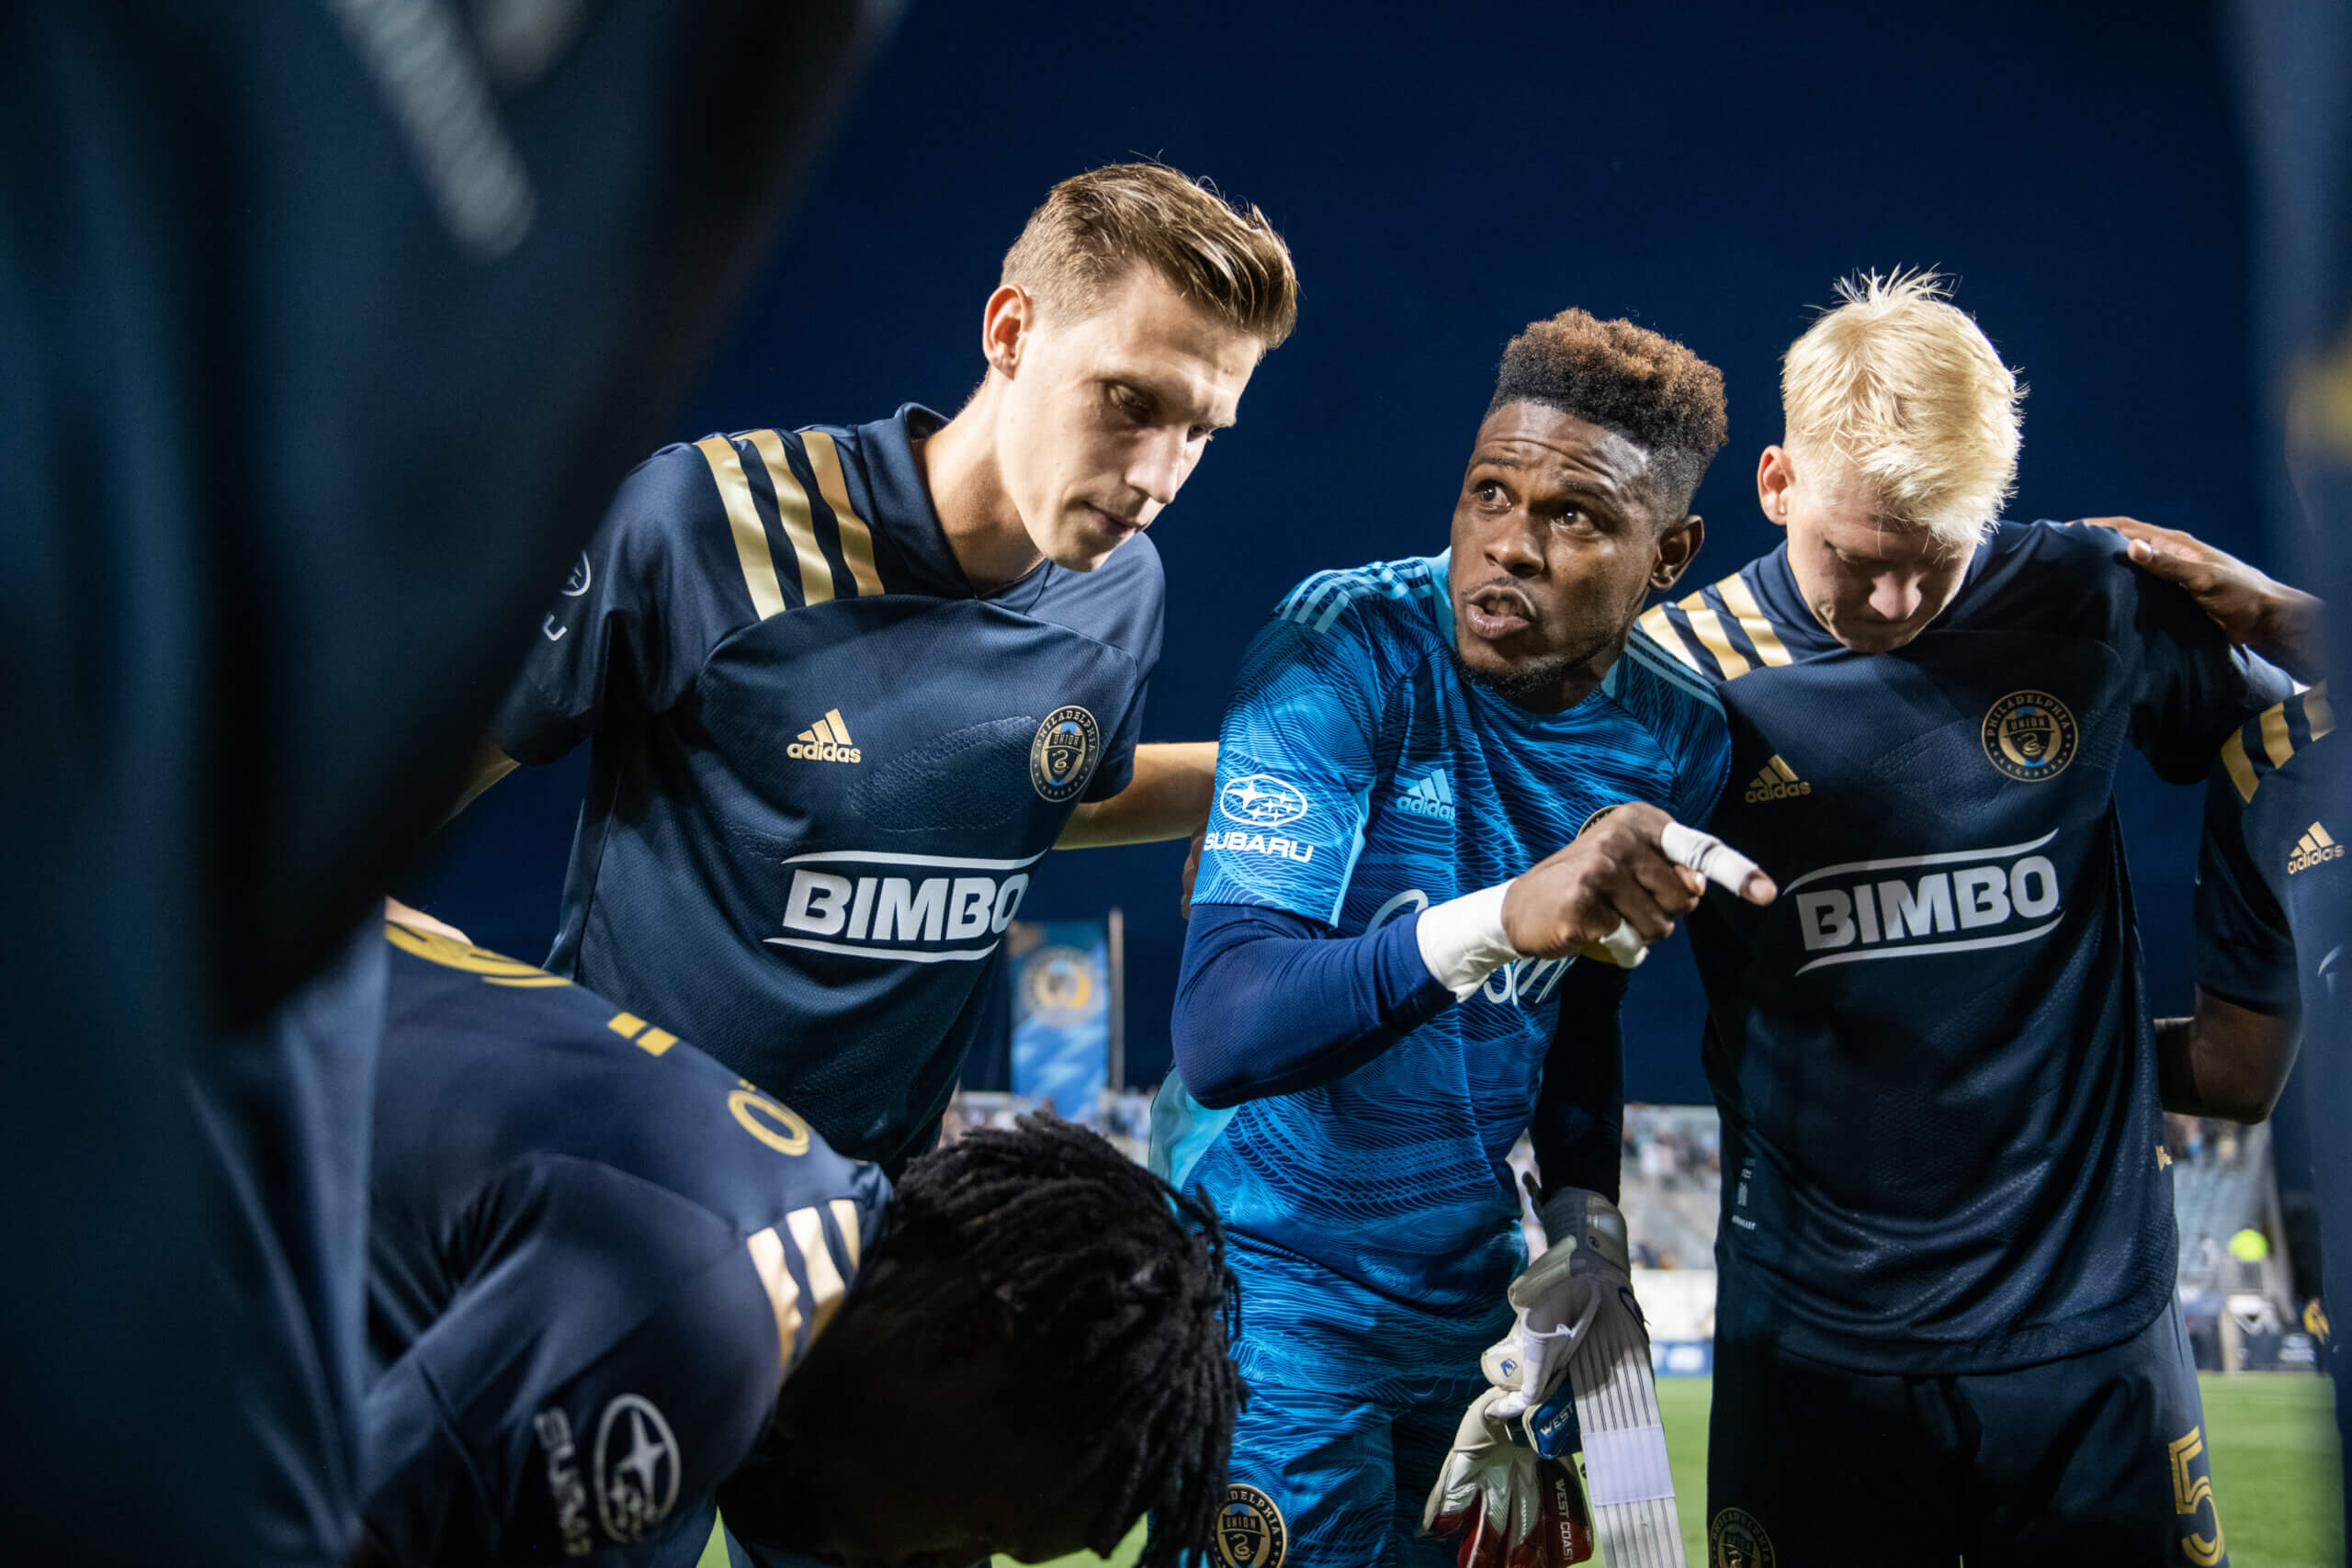 Union Season Preview: The 2023 Roster – Philly Sports